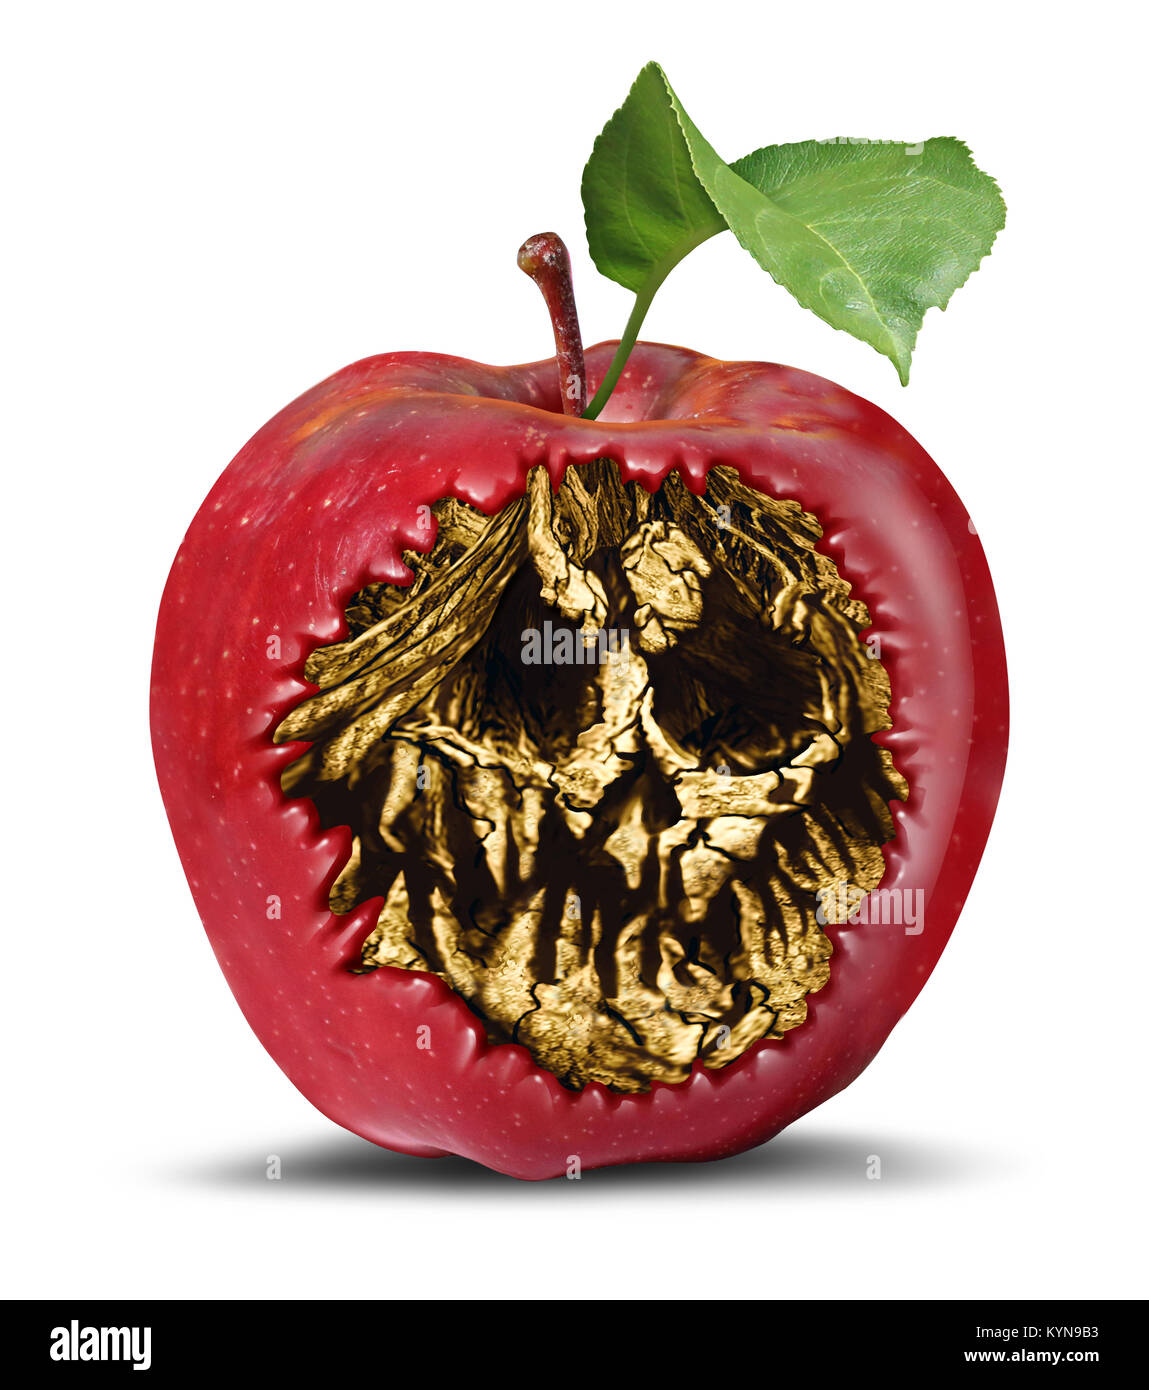 Poison apple and food safety concept as a rotten fruit with a death hidden skull inside as a symbol of witchcraft or magical curse. Stock Photo